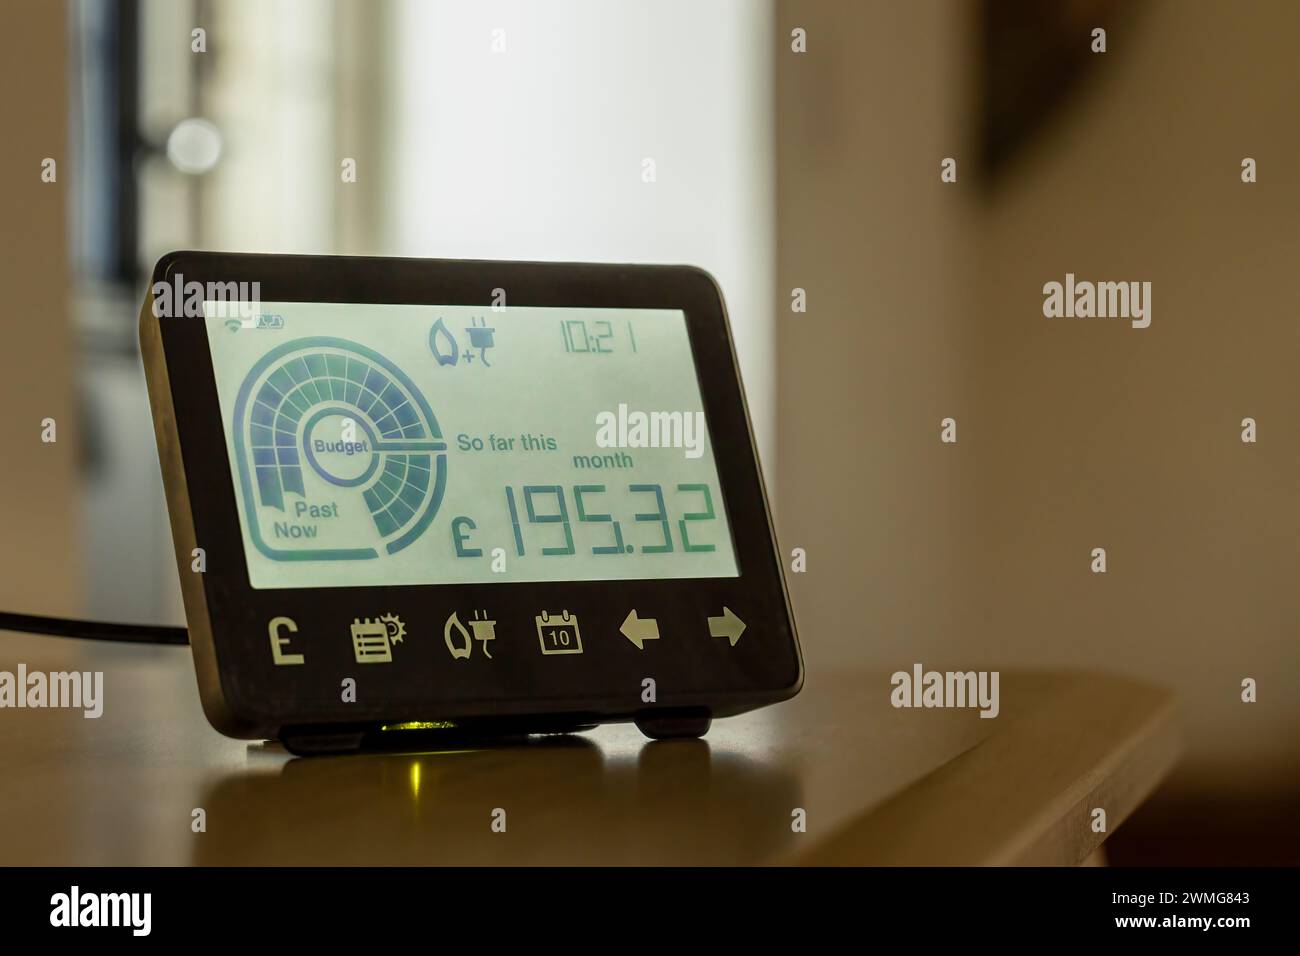 Energy Smart meter in the home Stock Photo